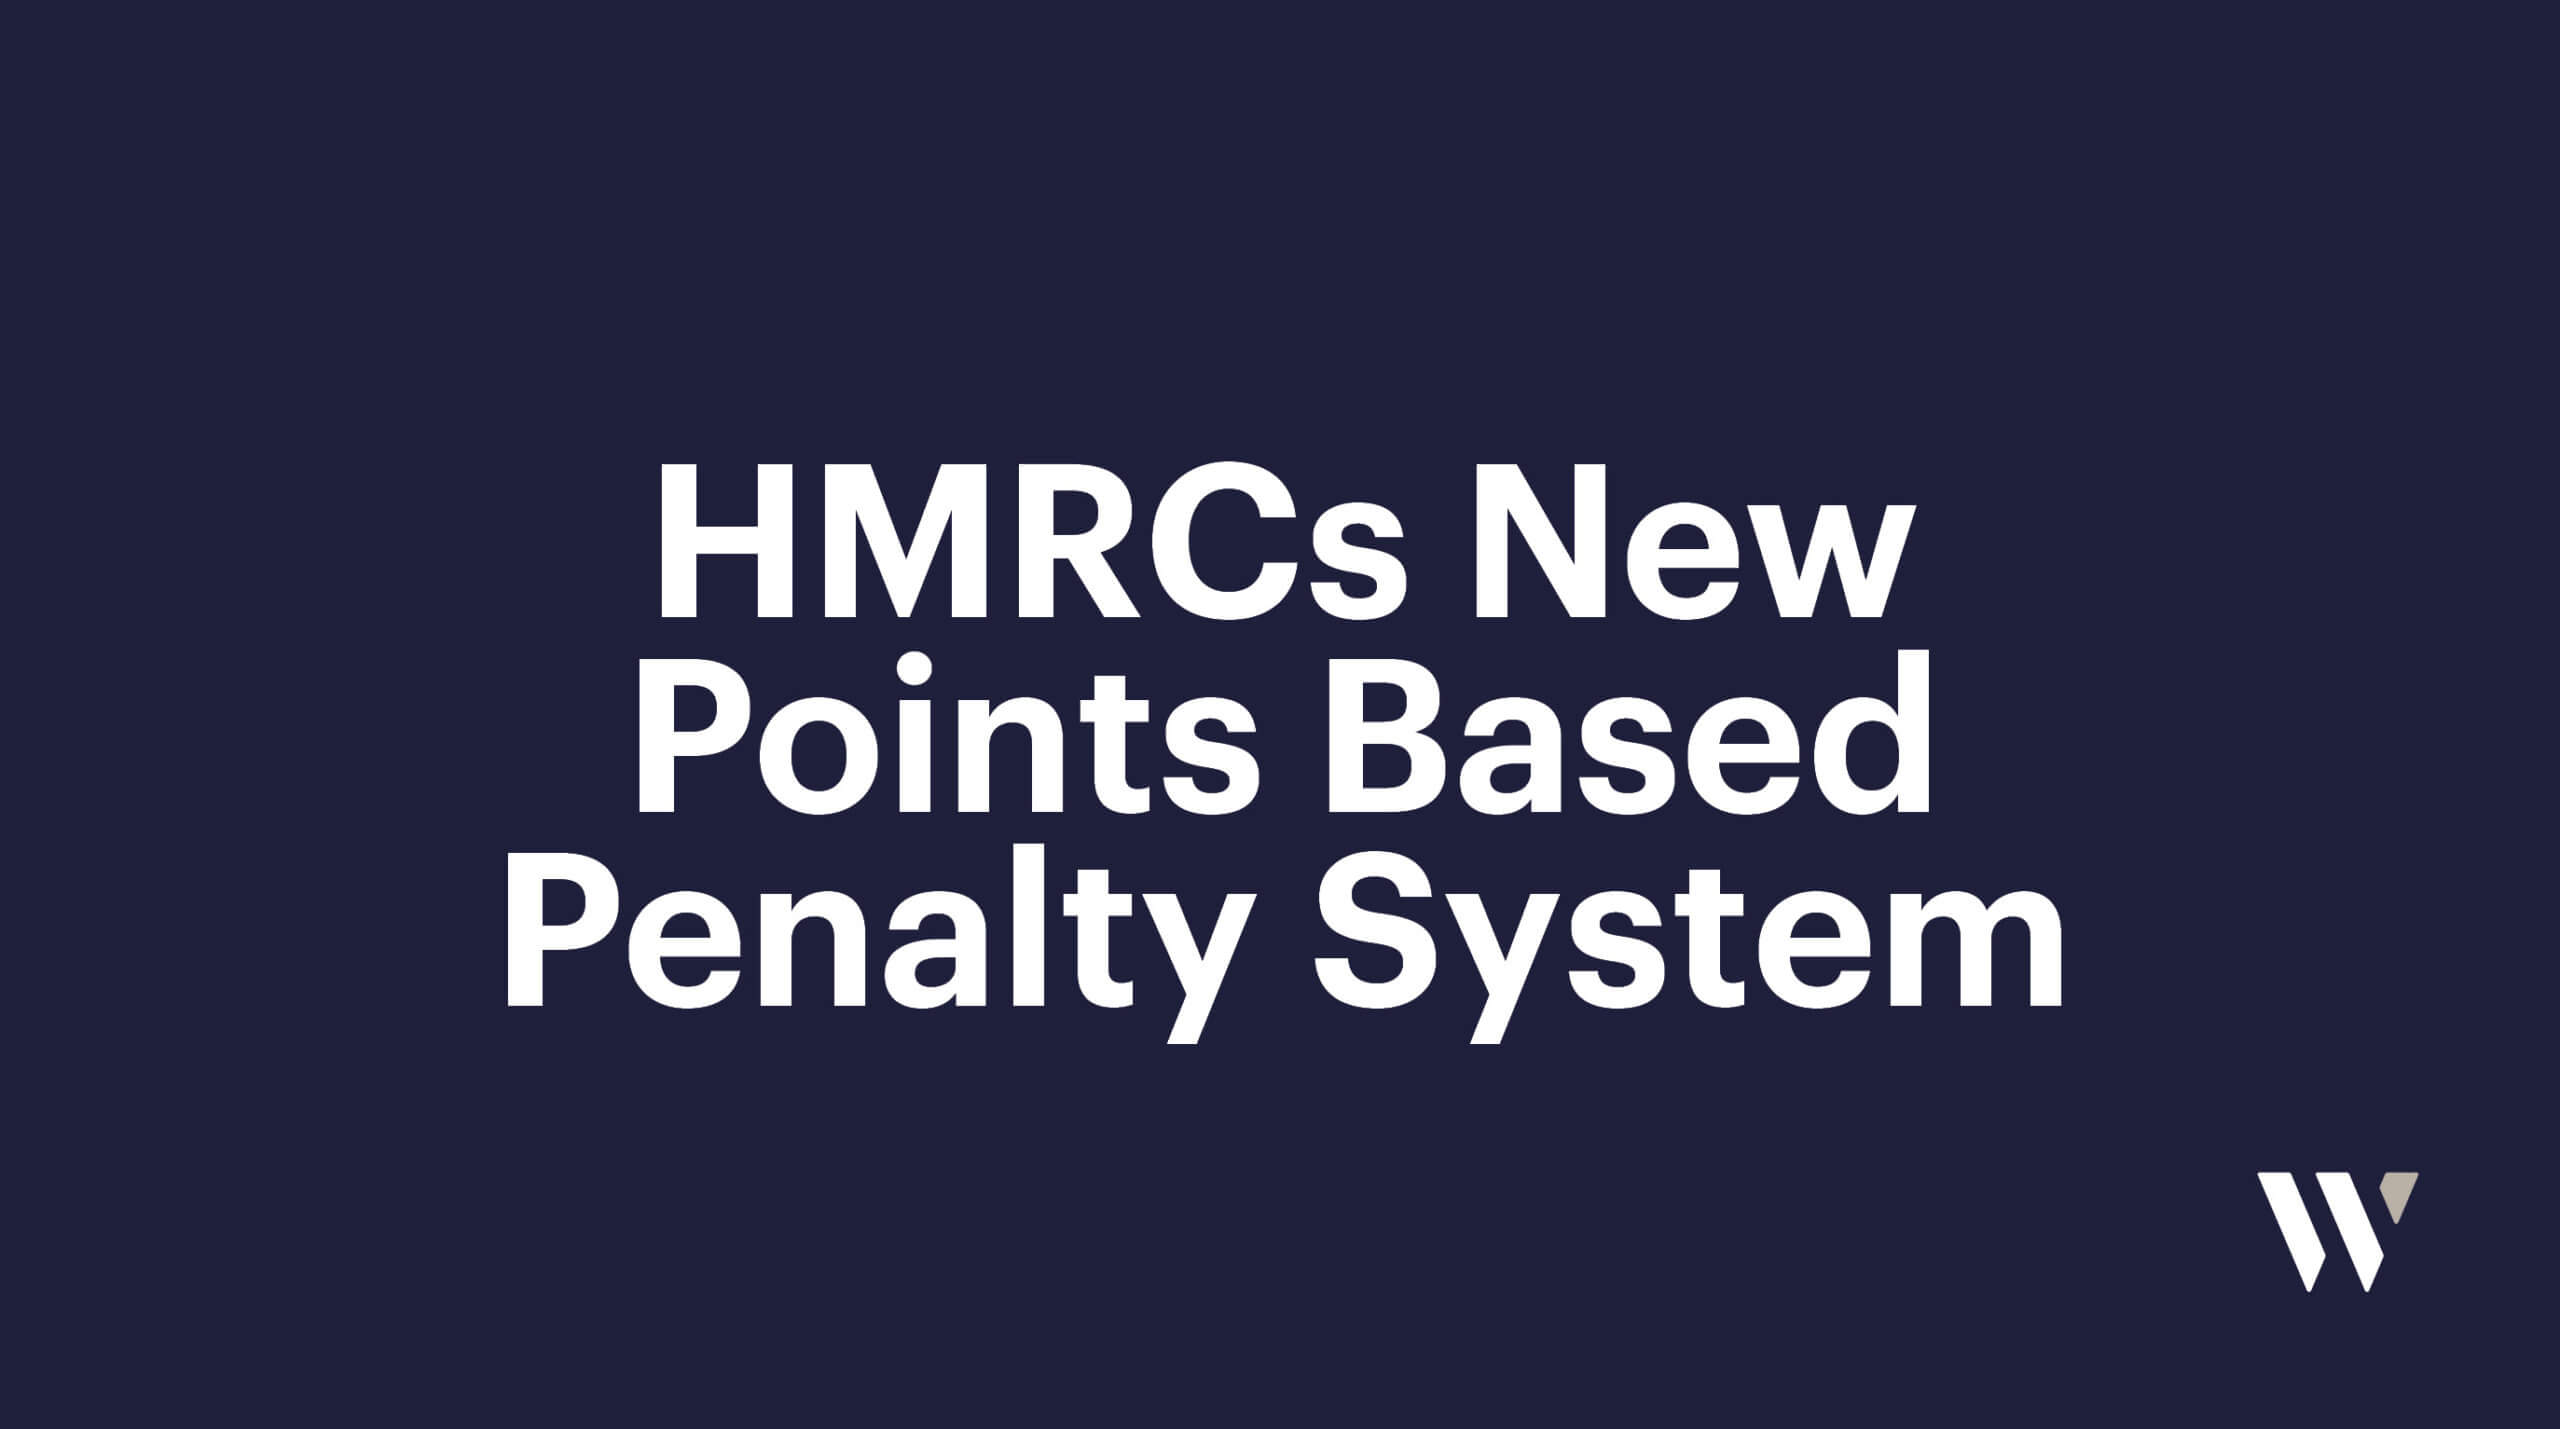 Points Based Penalties